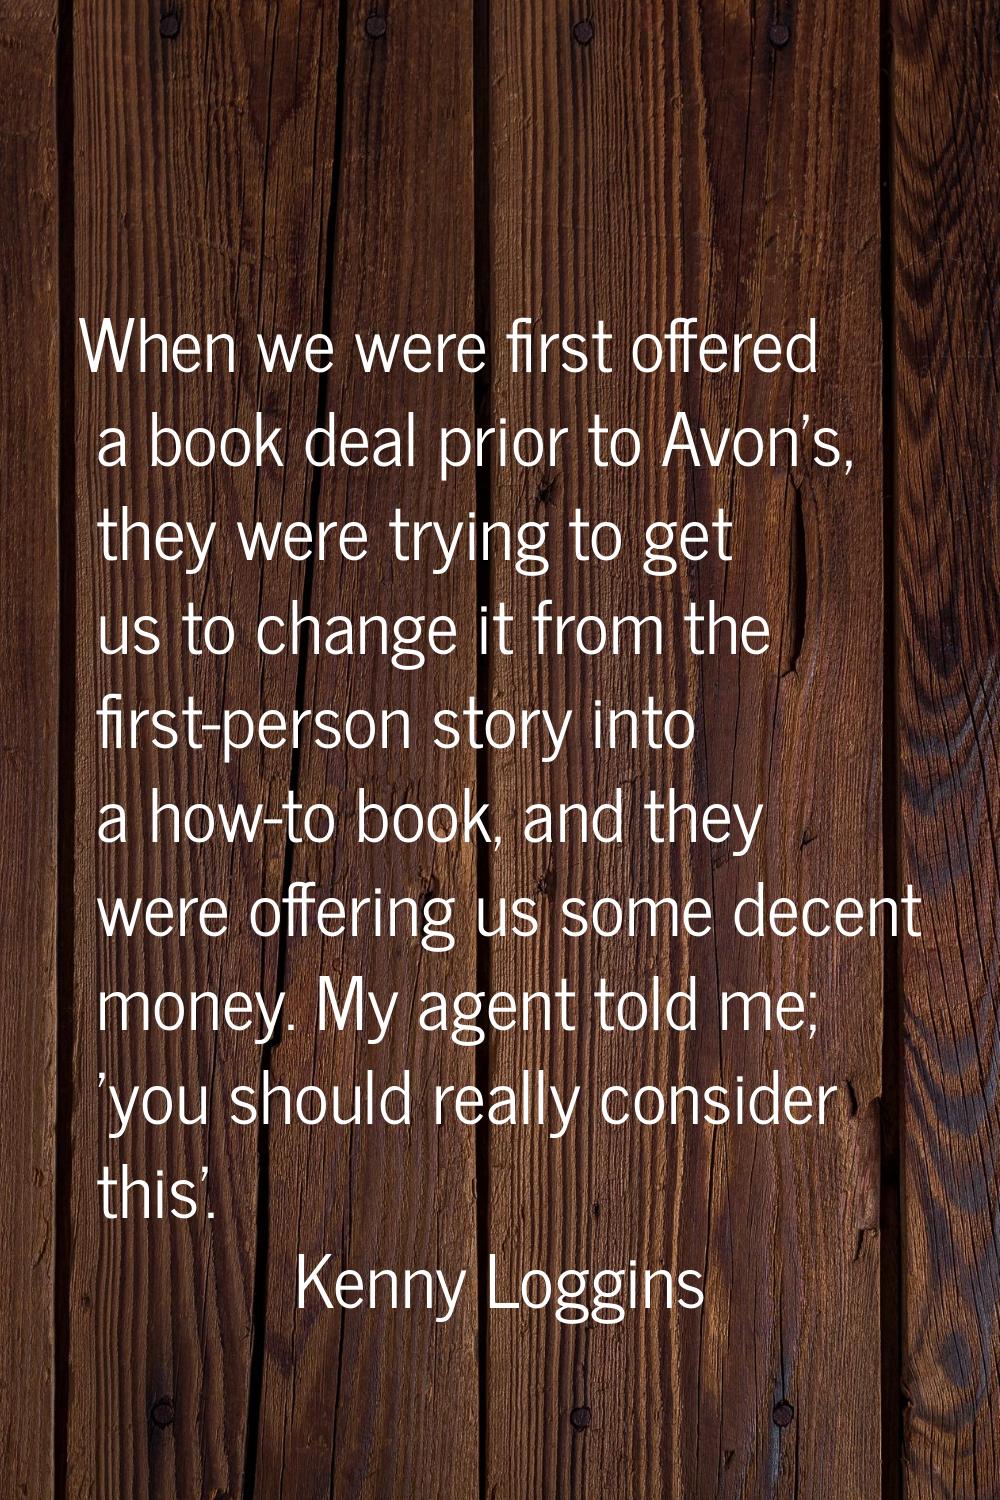 When we were first offered a book deal prior to Avon's, they were trying to get us to change it fro